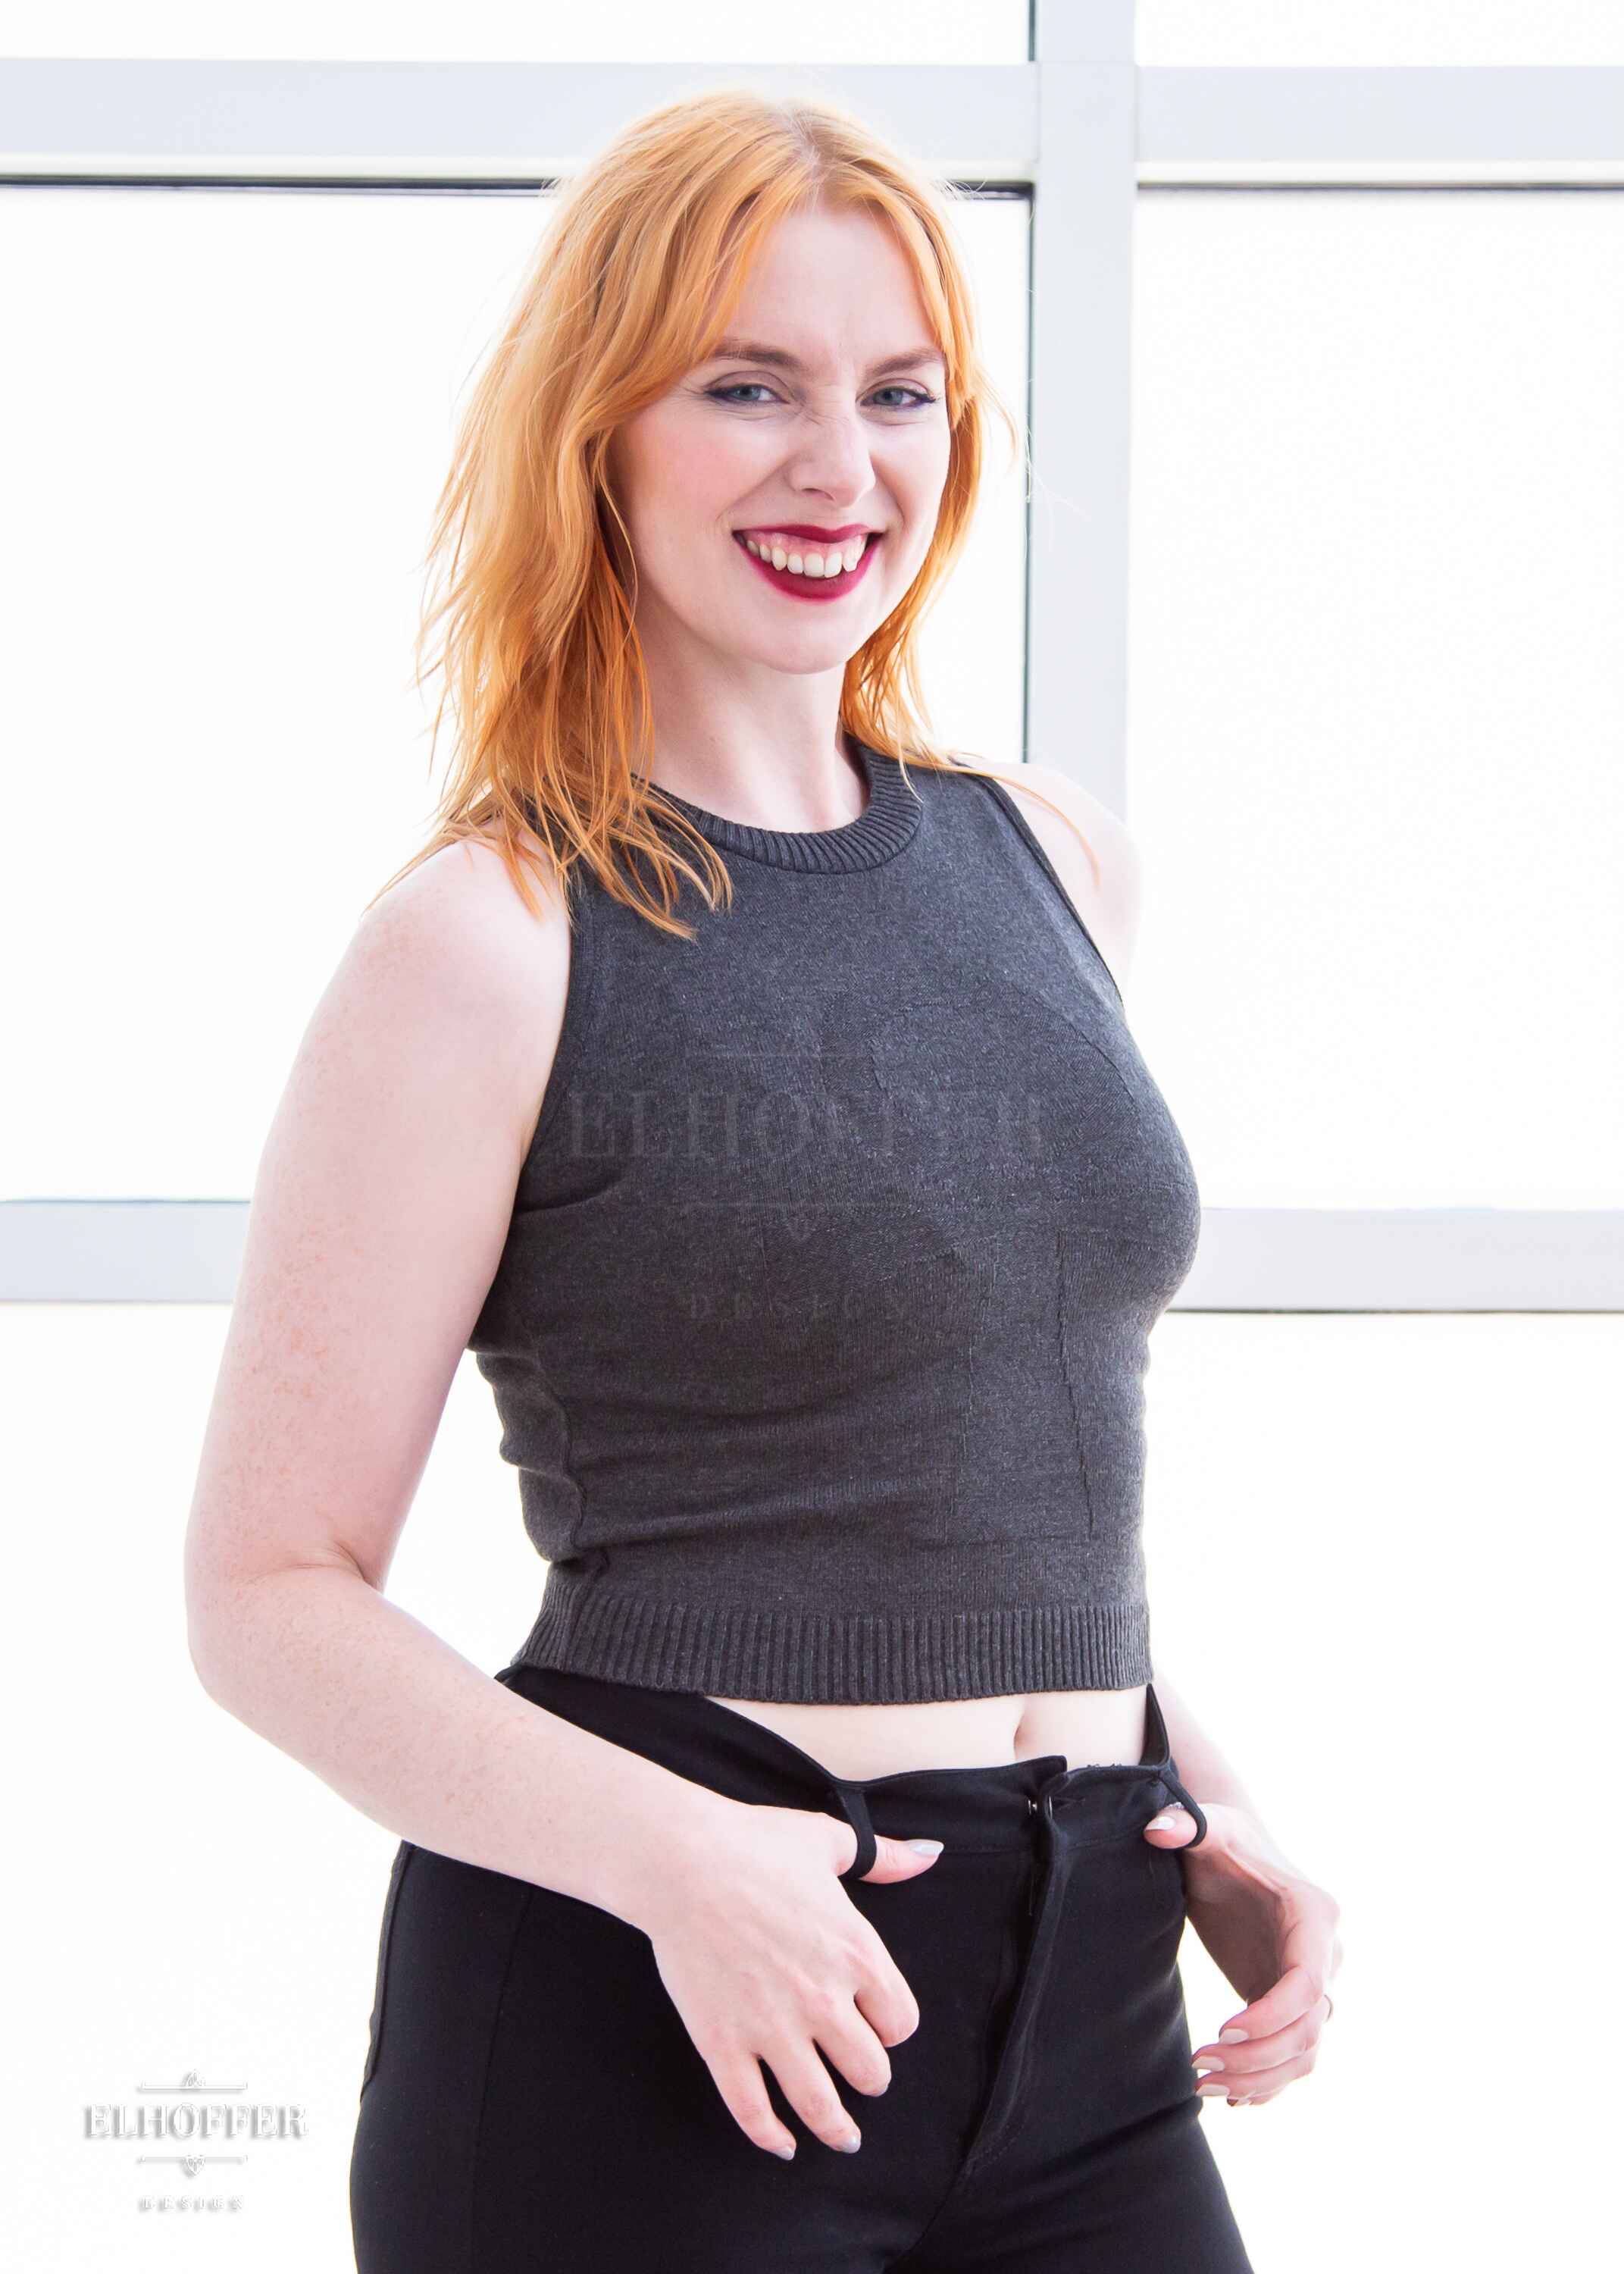 Harley, a fair skinned S model with shoulder length strawberry blonde hair, is smiling while wearing a dark grey sleeveless knit crop top with a large subtle ankh design on the front.